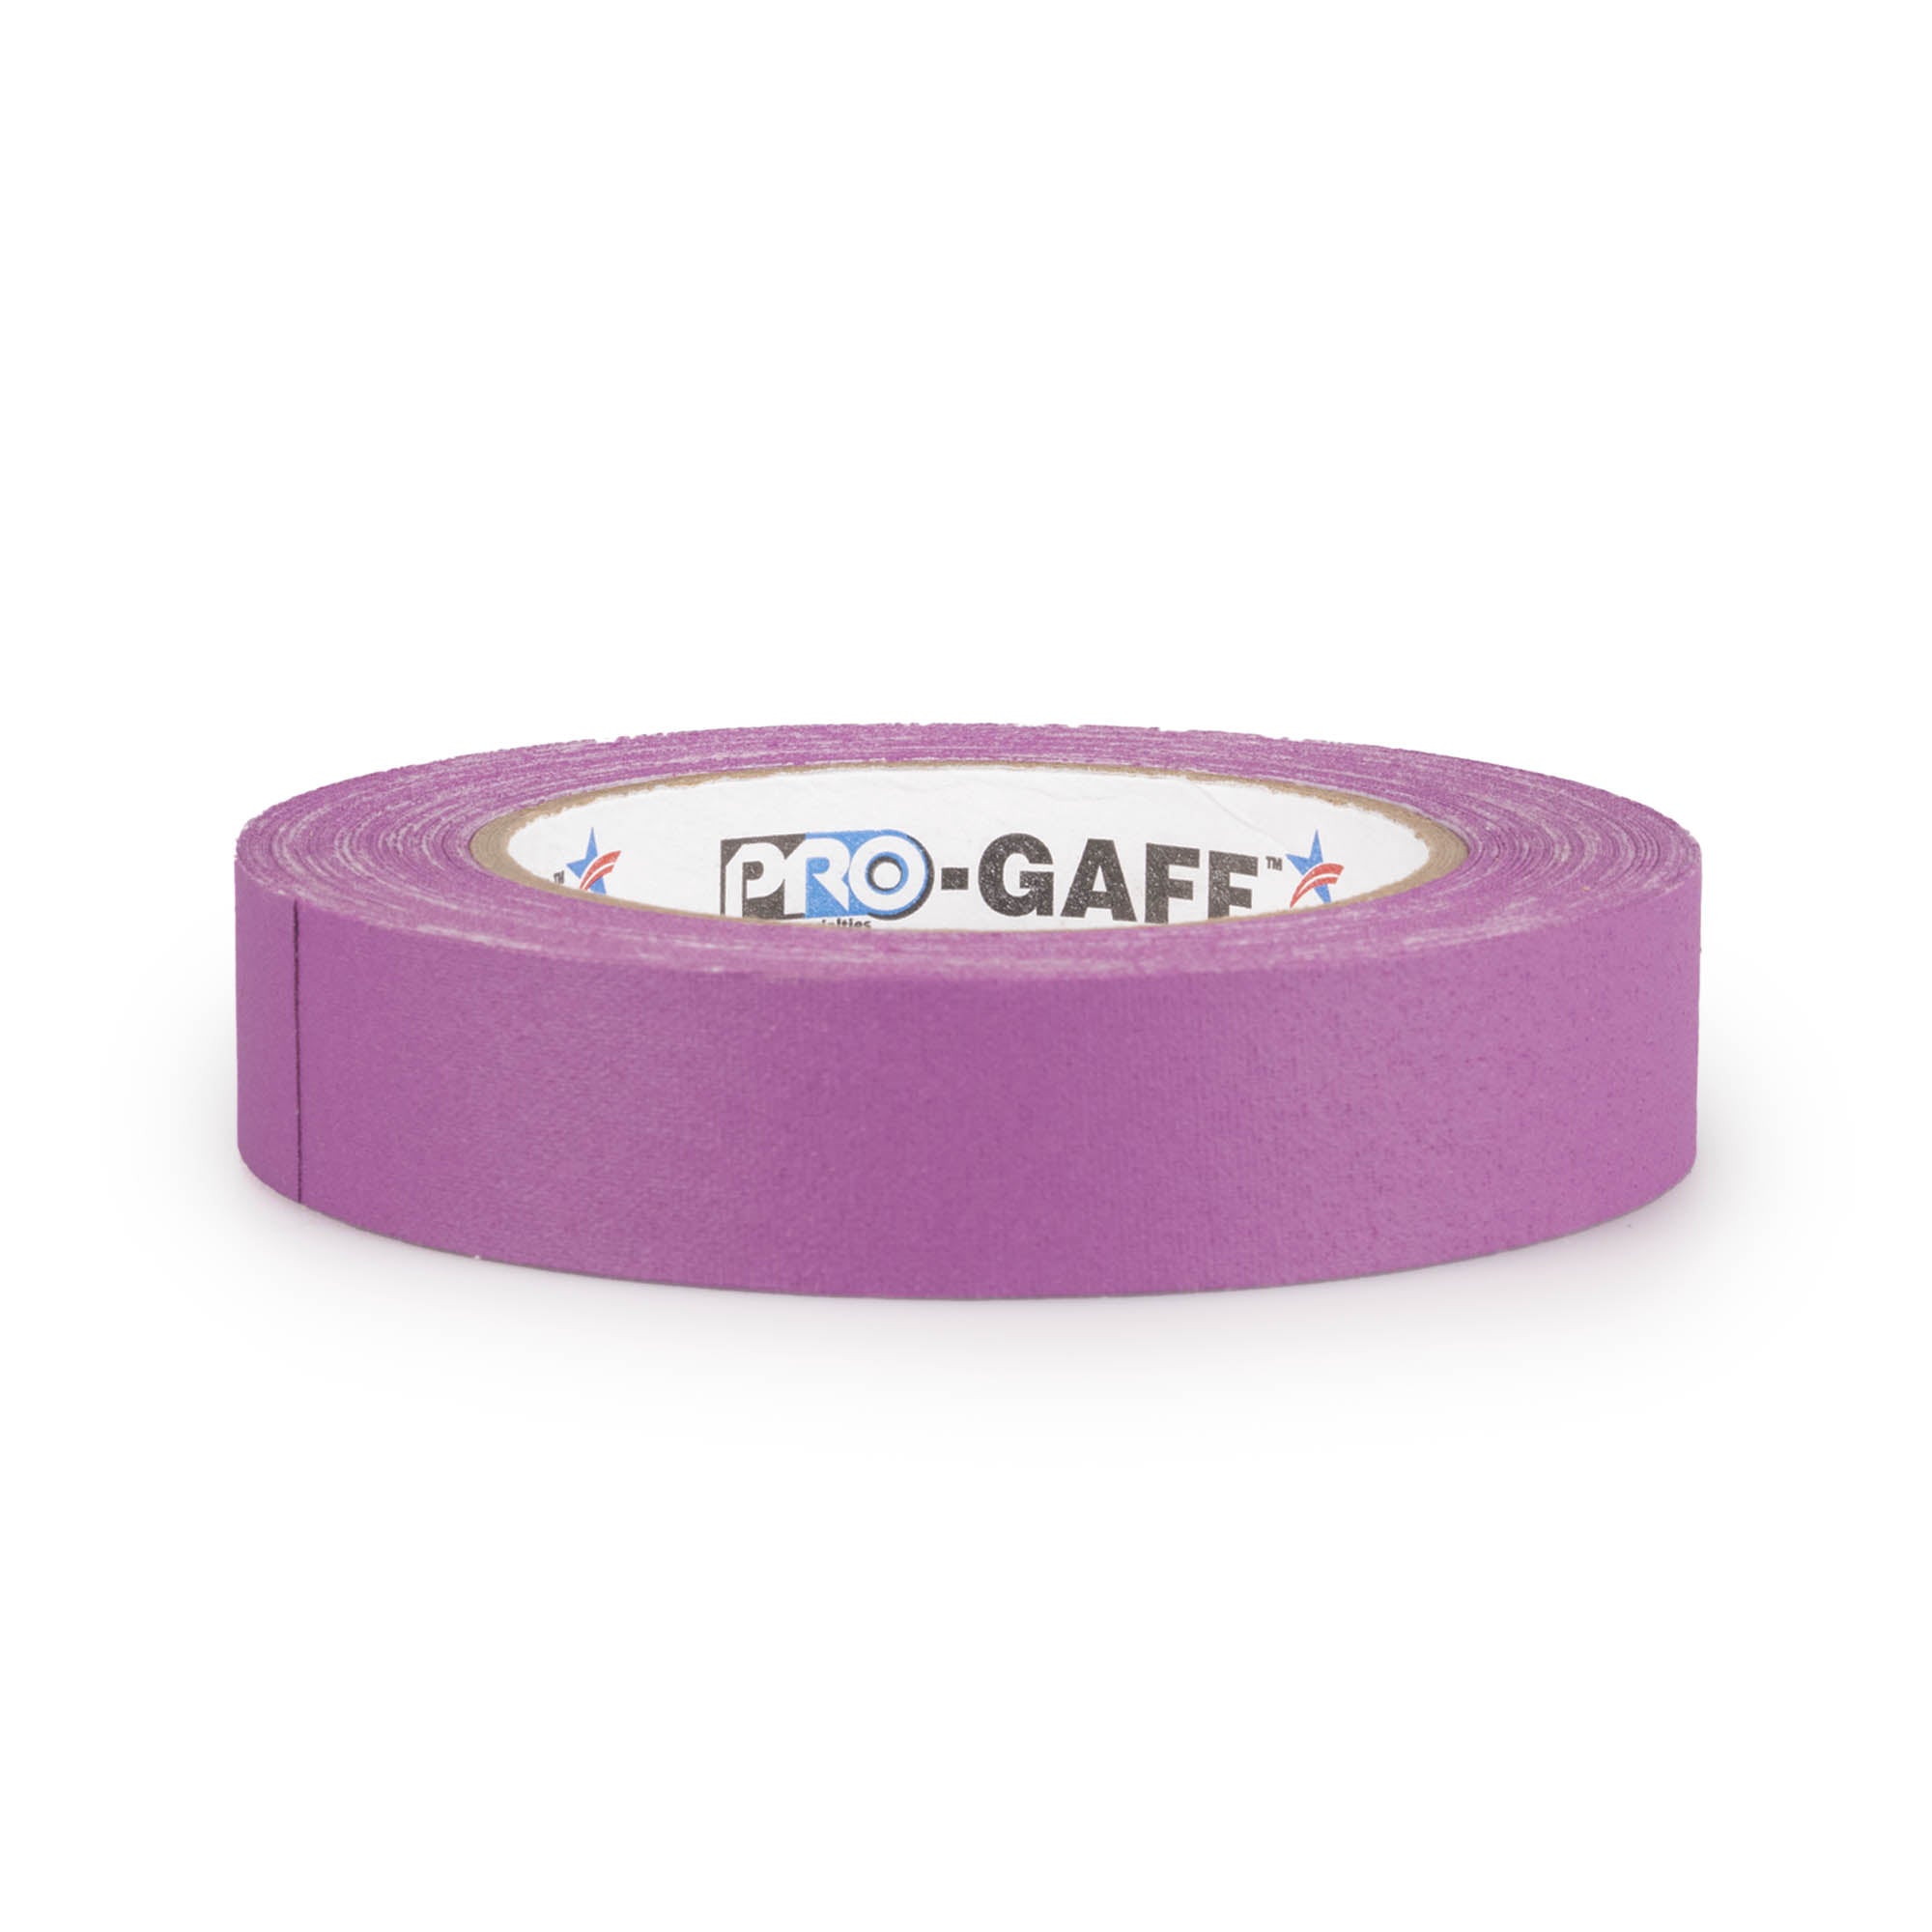 25m roll of pro gaff fabric adhesive tape in purple laying in a white background